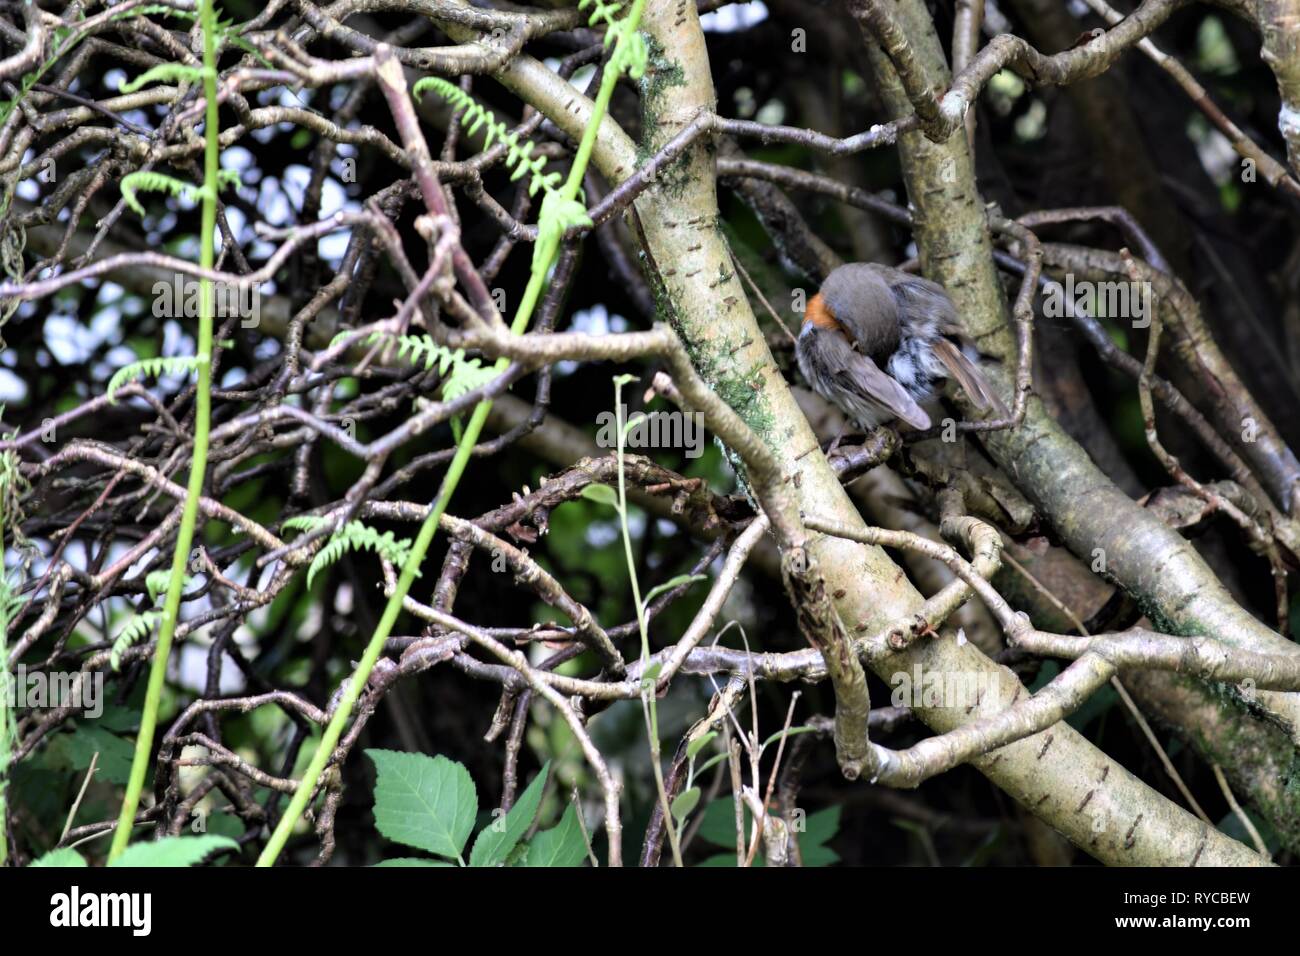 Robin Redbreast, Erithacus Rubecula, sheltering inside a cotoneaster hedge cut to reveal the inner structure of the branches and twigs. Cleaning back. Stock Photo